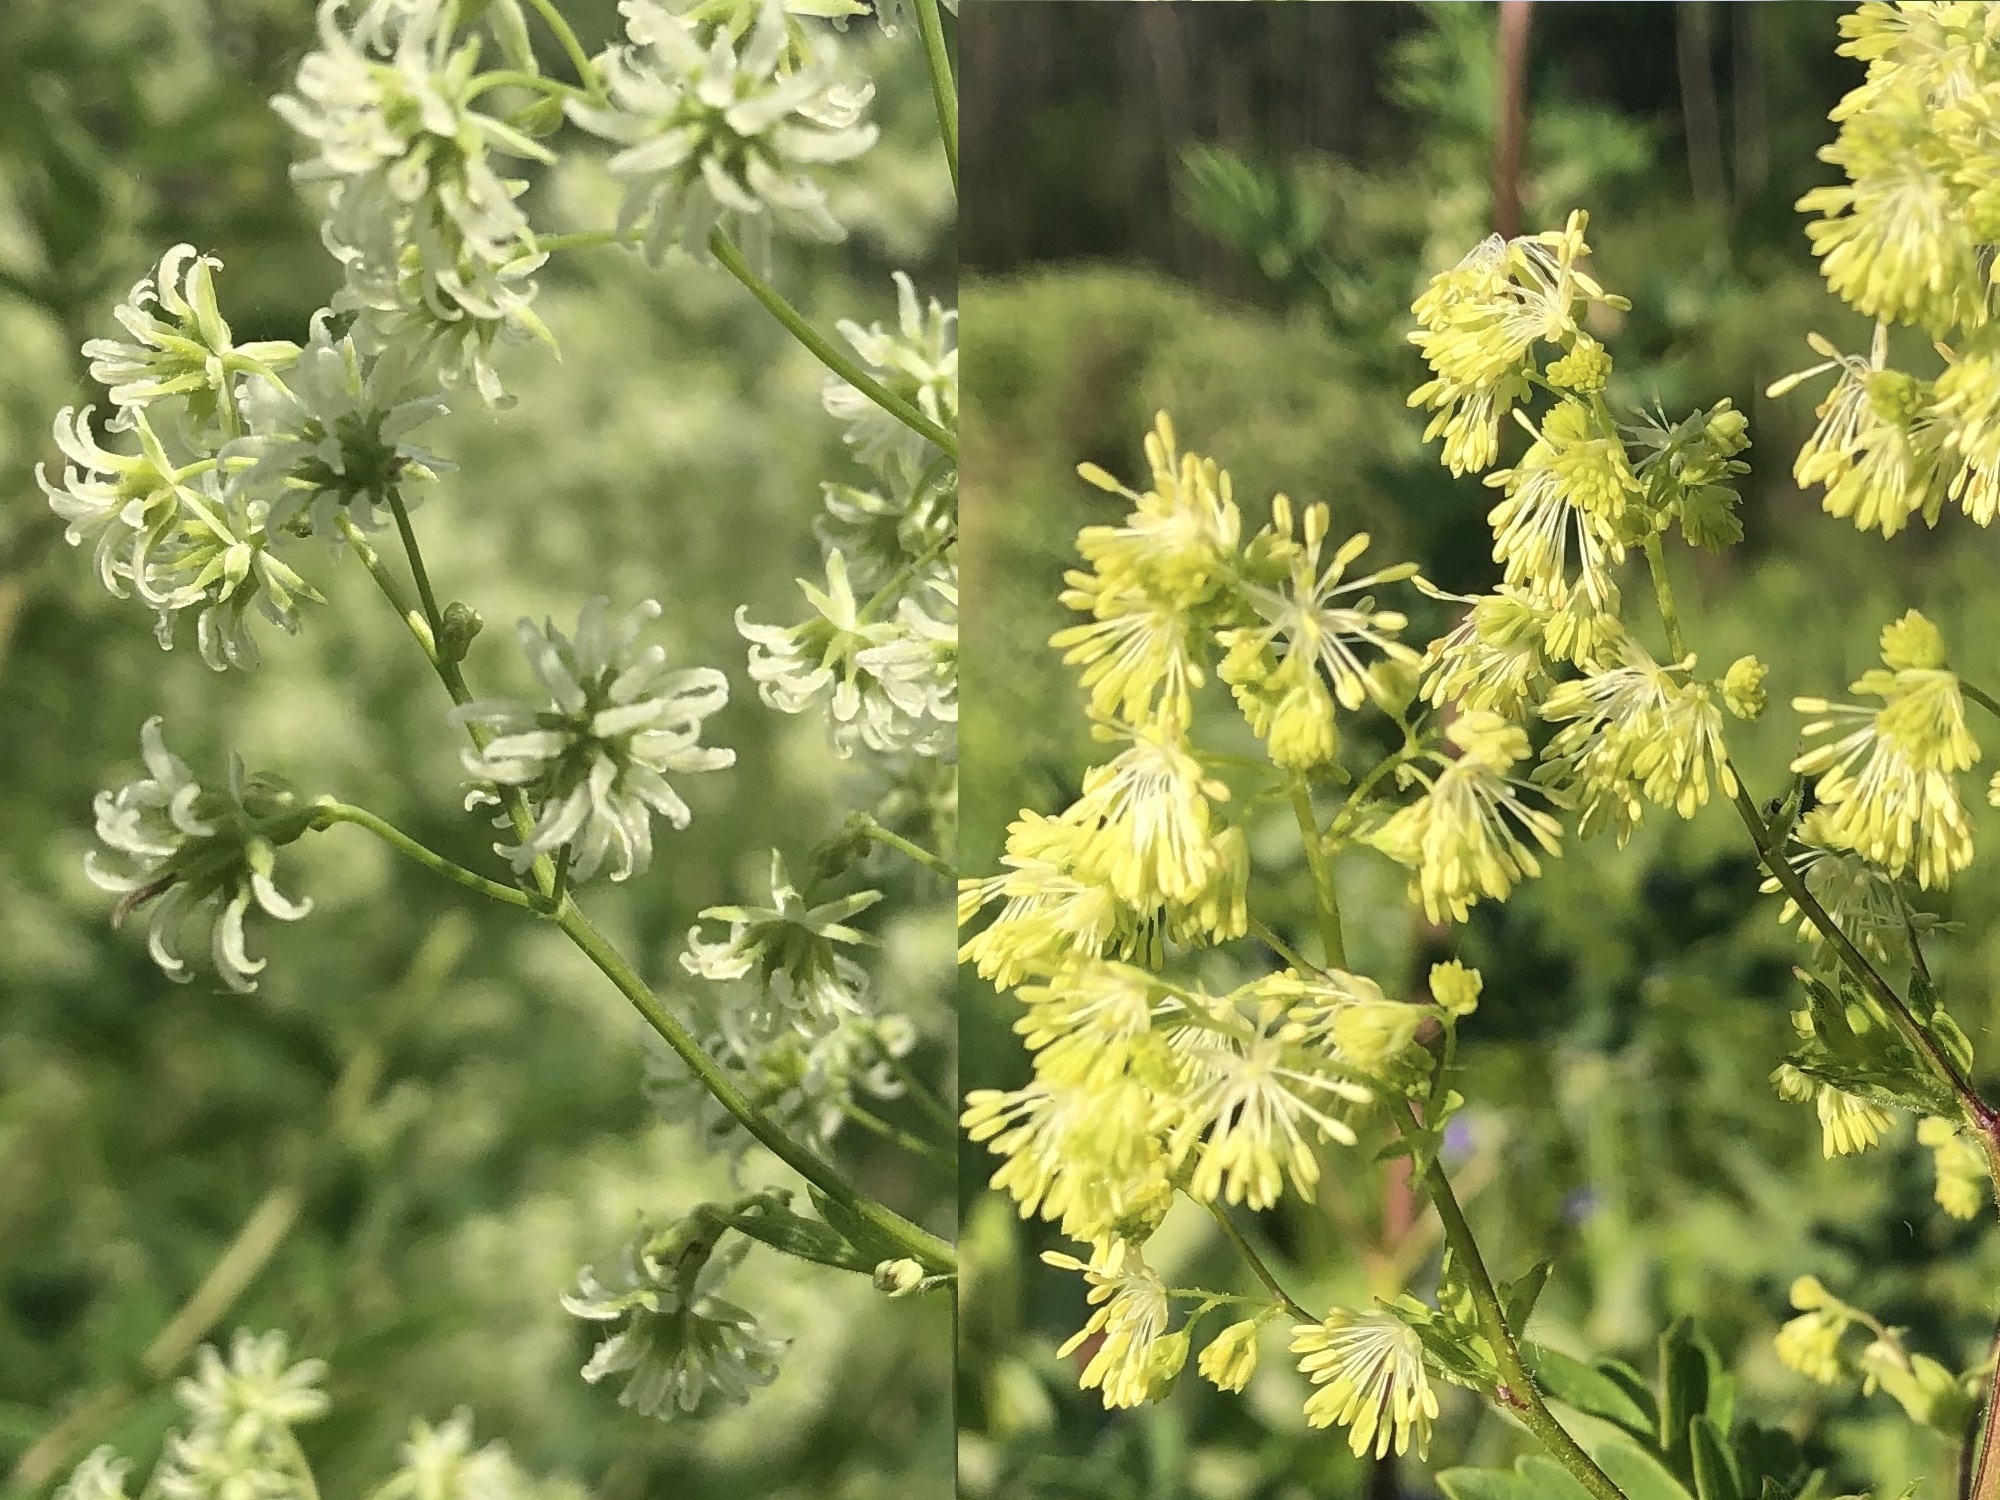 Tall Meadow-rue female and male flower comparison.